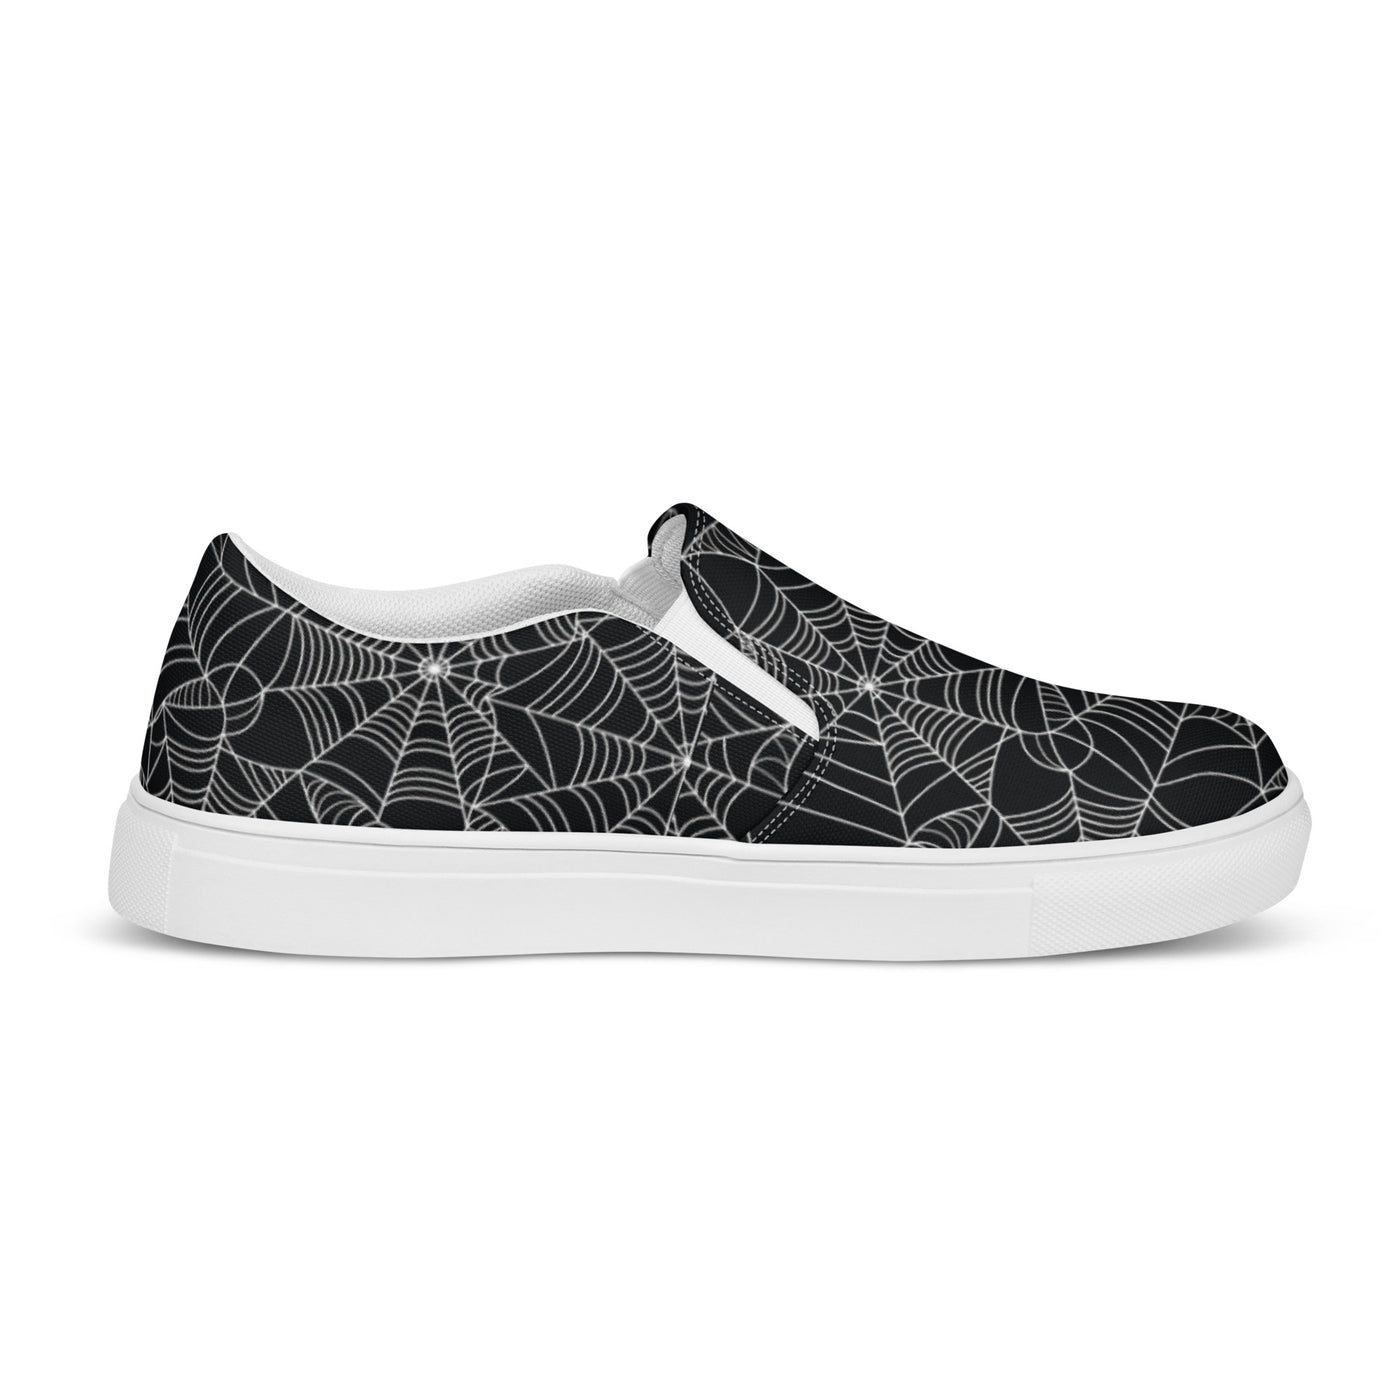 Tangled Web Spiderweb Women’s slip-on canvas shoes